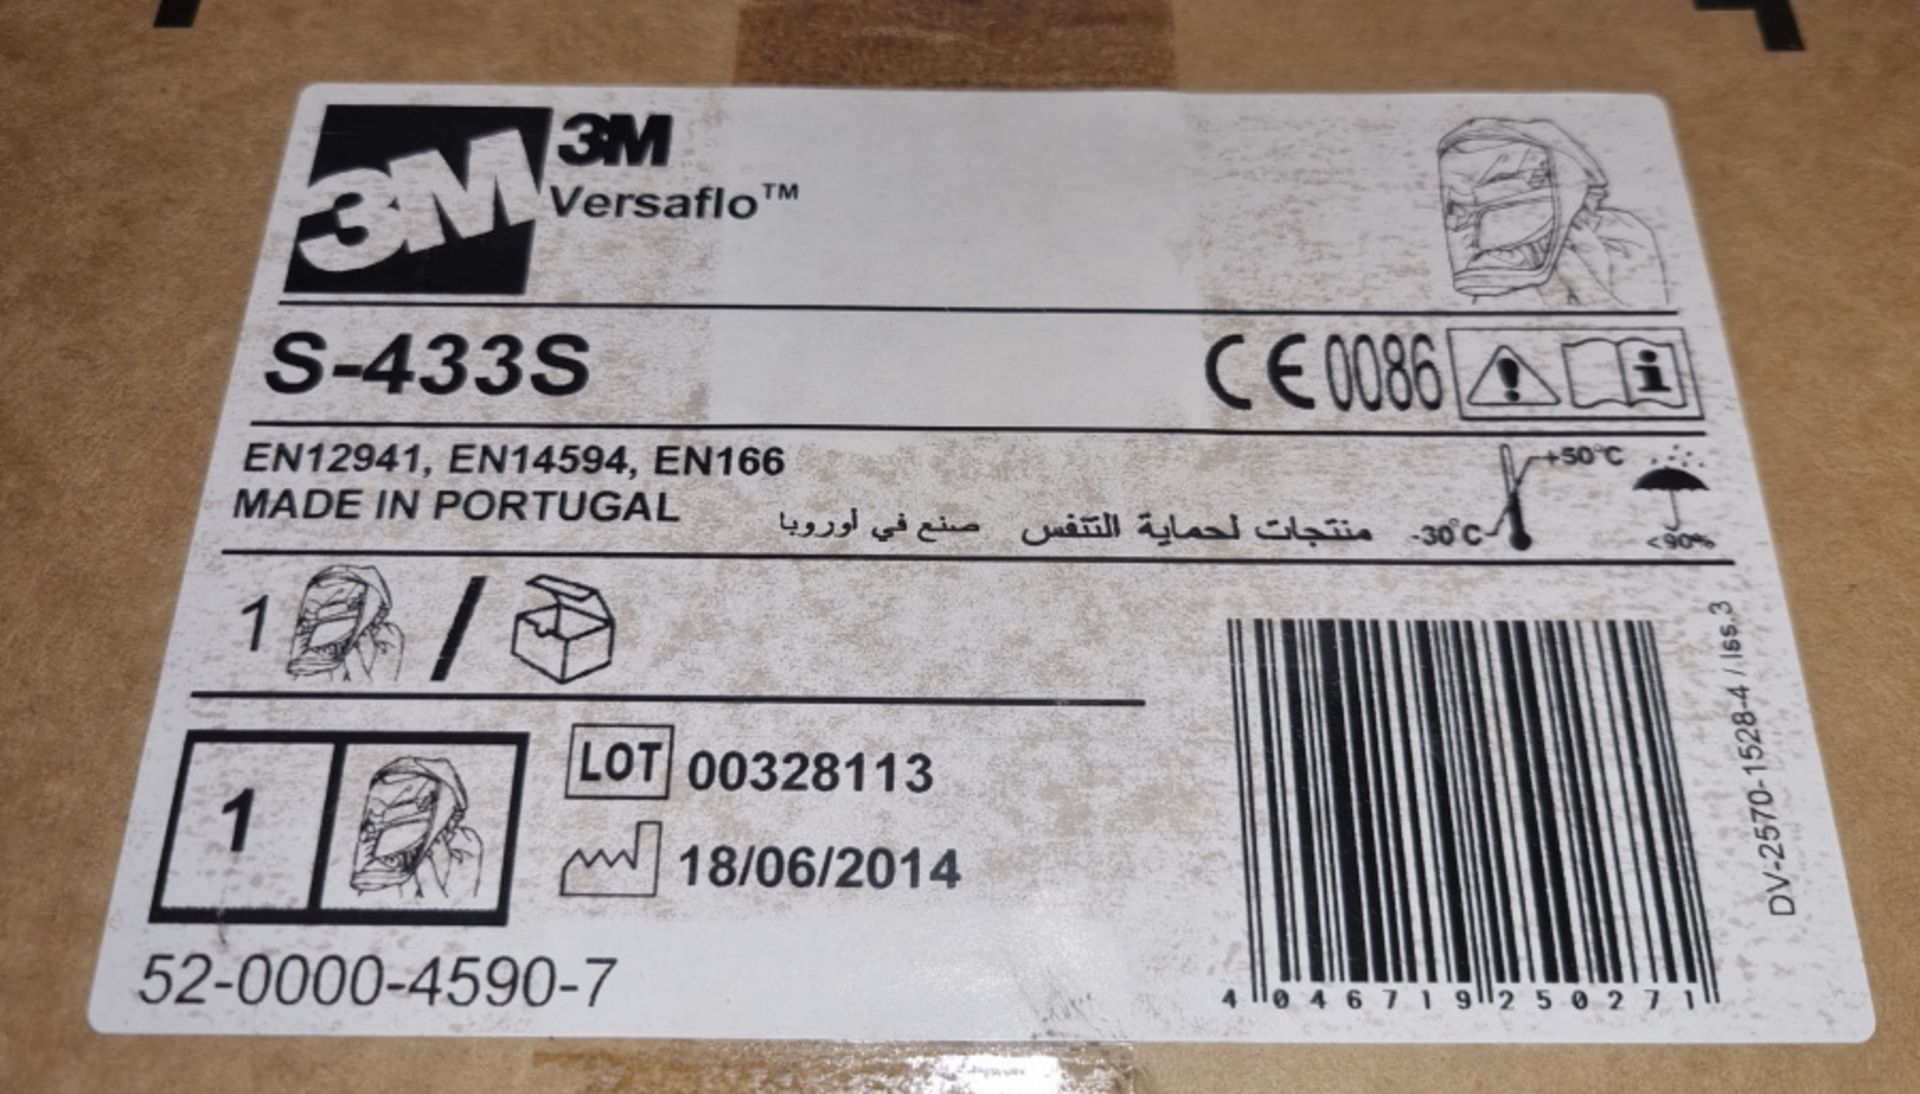 3M Versaflo S-433S Headtop single pack x 60 boxes - Image 3 of 4